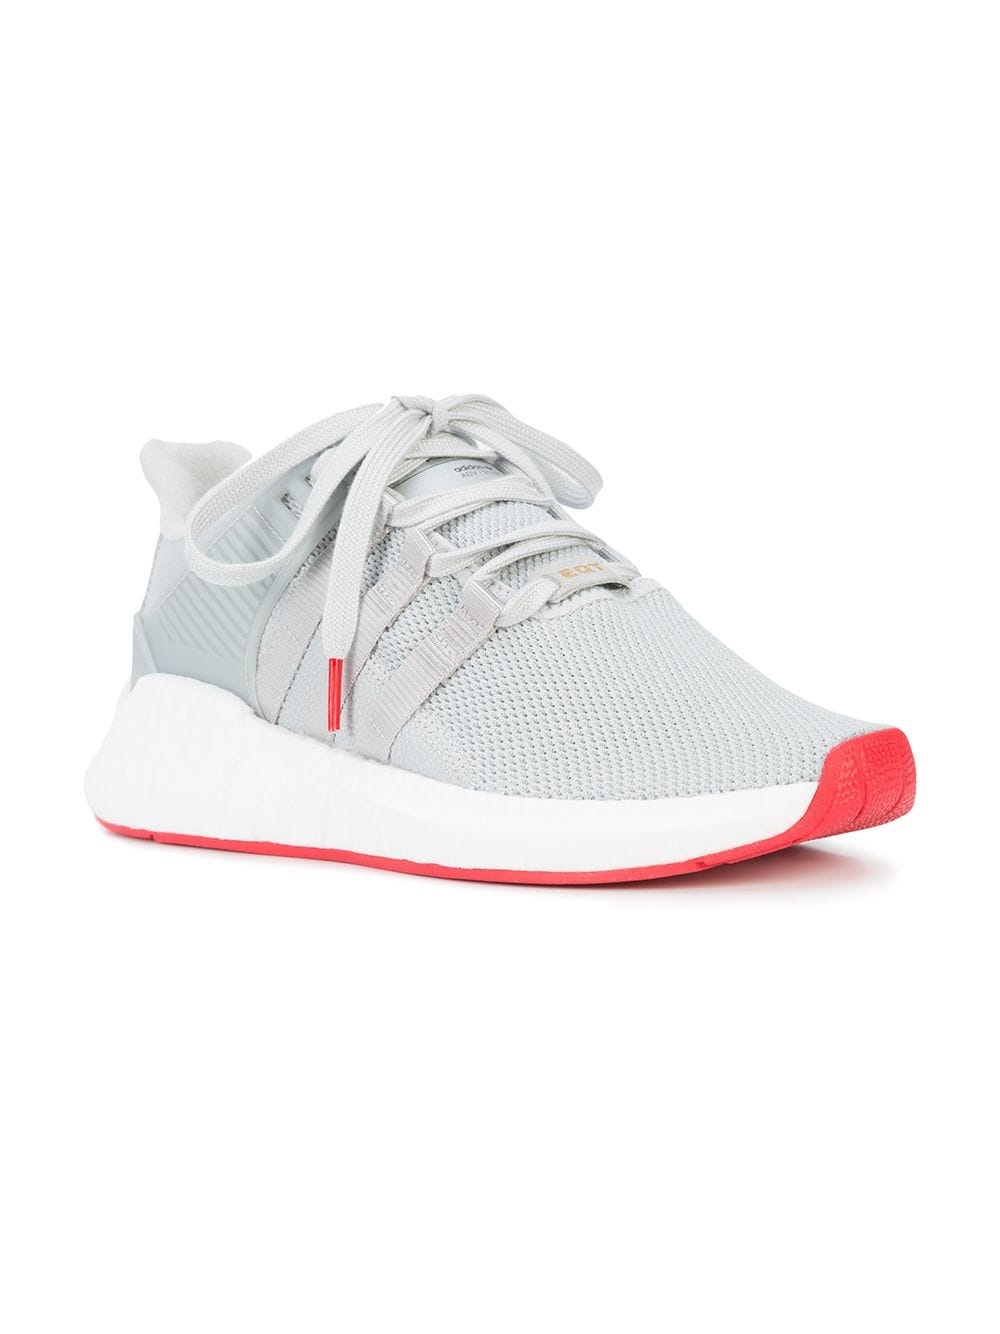 EQT Support 93/17 sneakers - 2